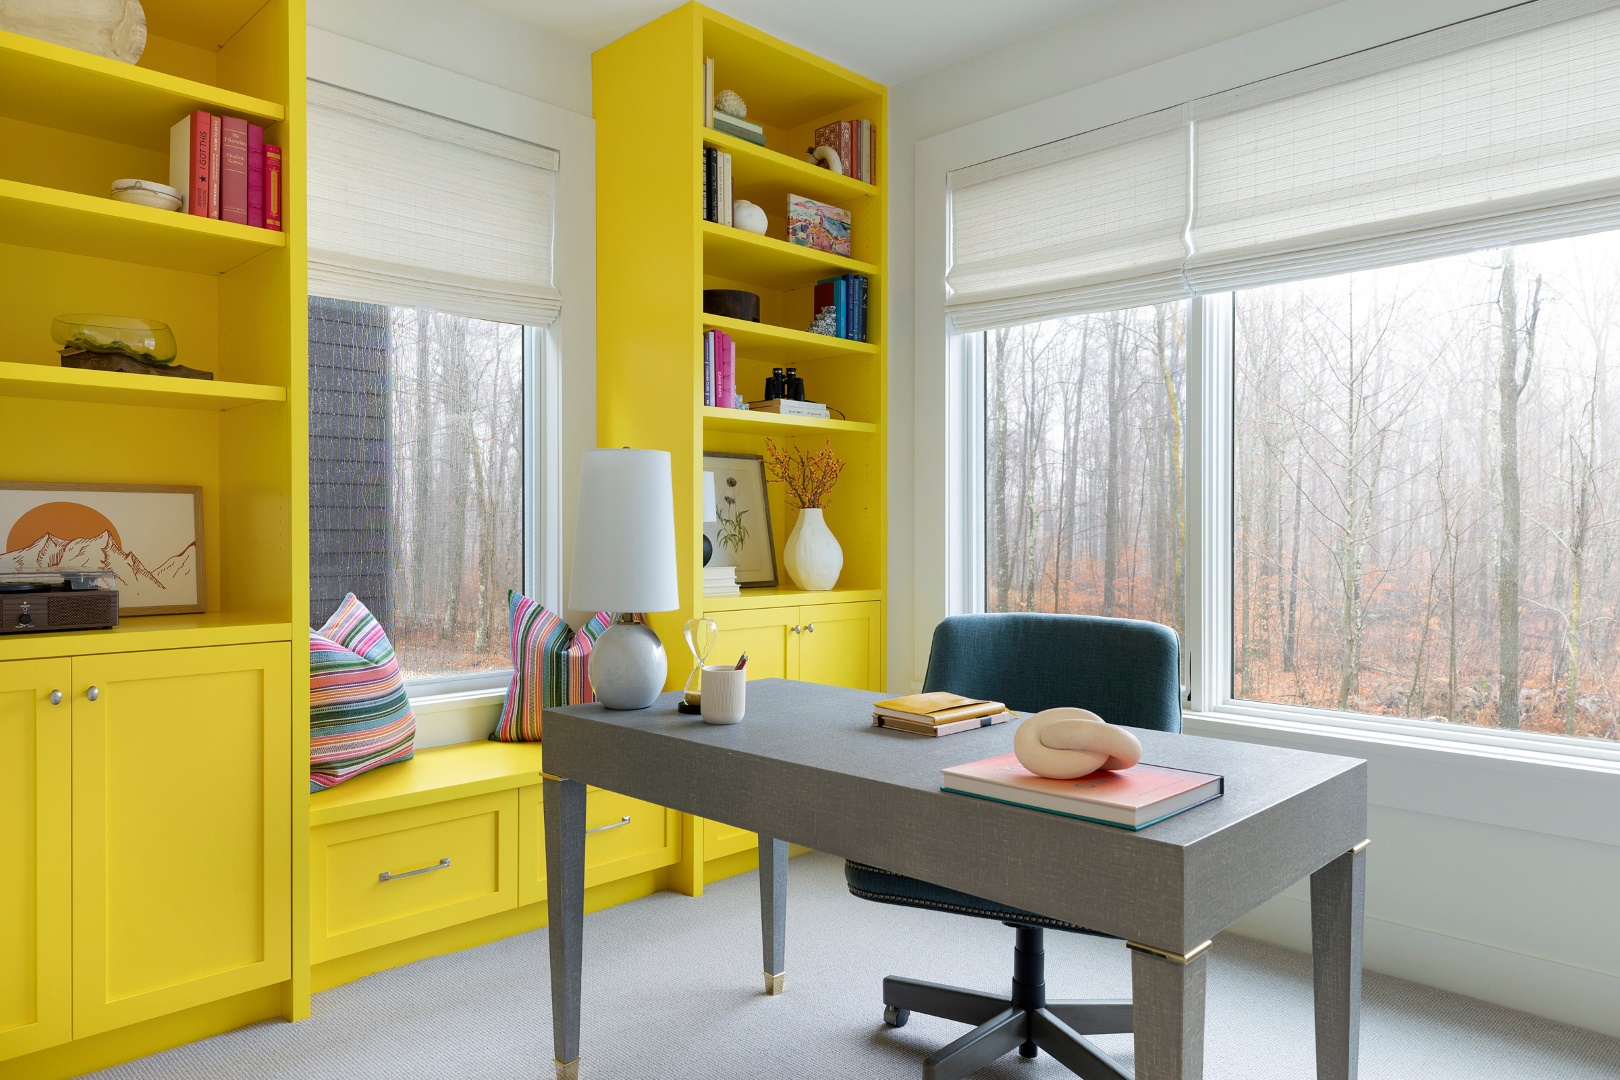 18 Transitional Home Office Designs for a Chic and Functional Workspace